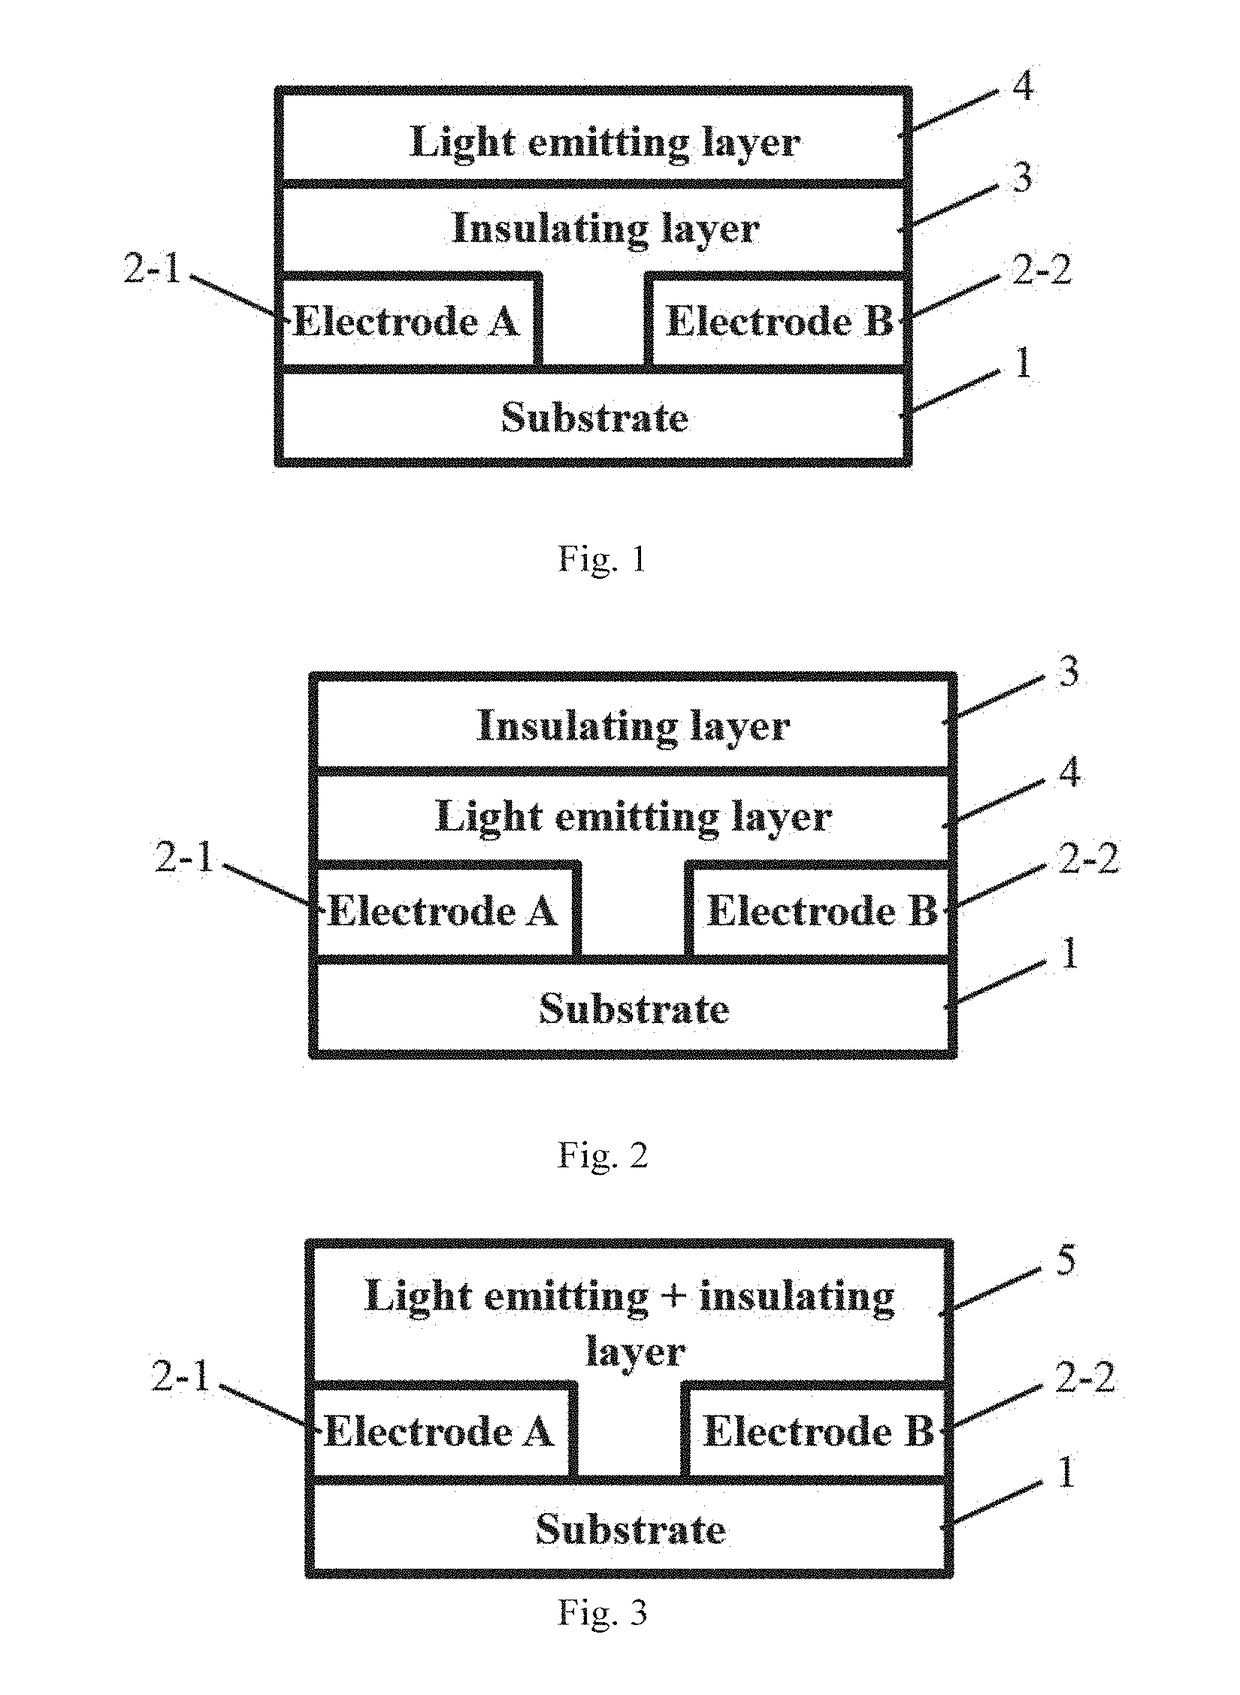 Planar electroluminescent devices and uses thereof